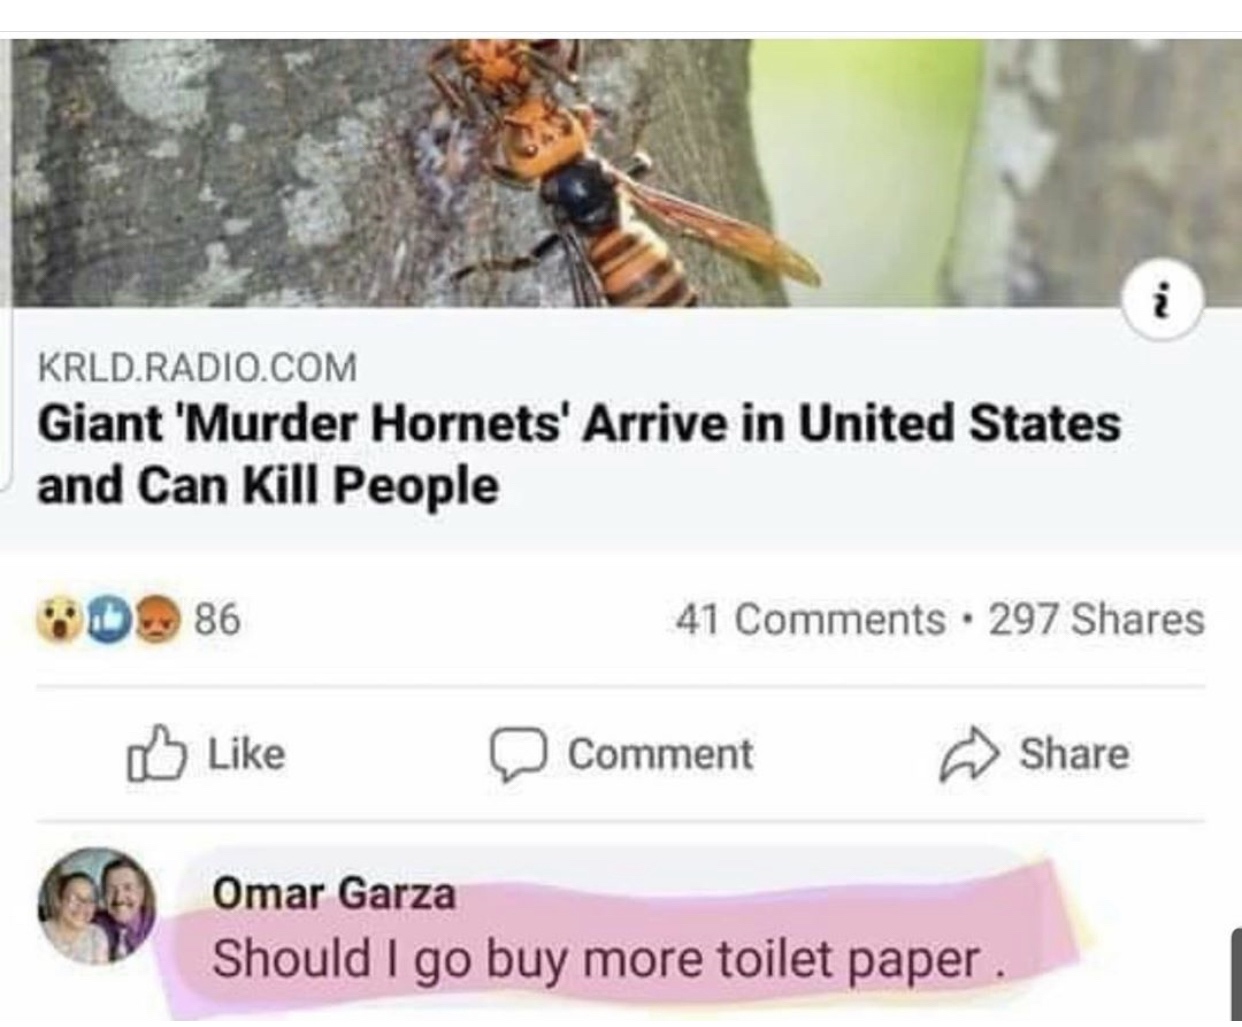 pest - Krld.Radio.Com Giant 'Murder Hornets' Arrive in United States and Can Kill People D 86 41 . 297 Comment 00 Omar Garza Should I go buy more toilet paper.